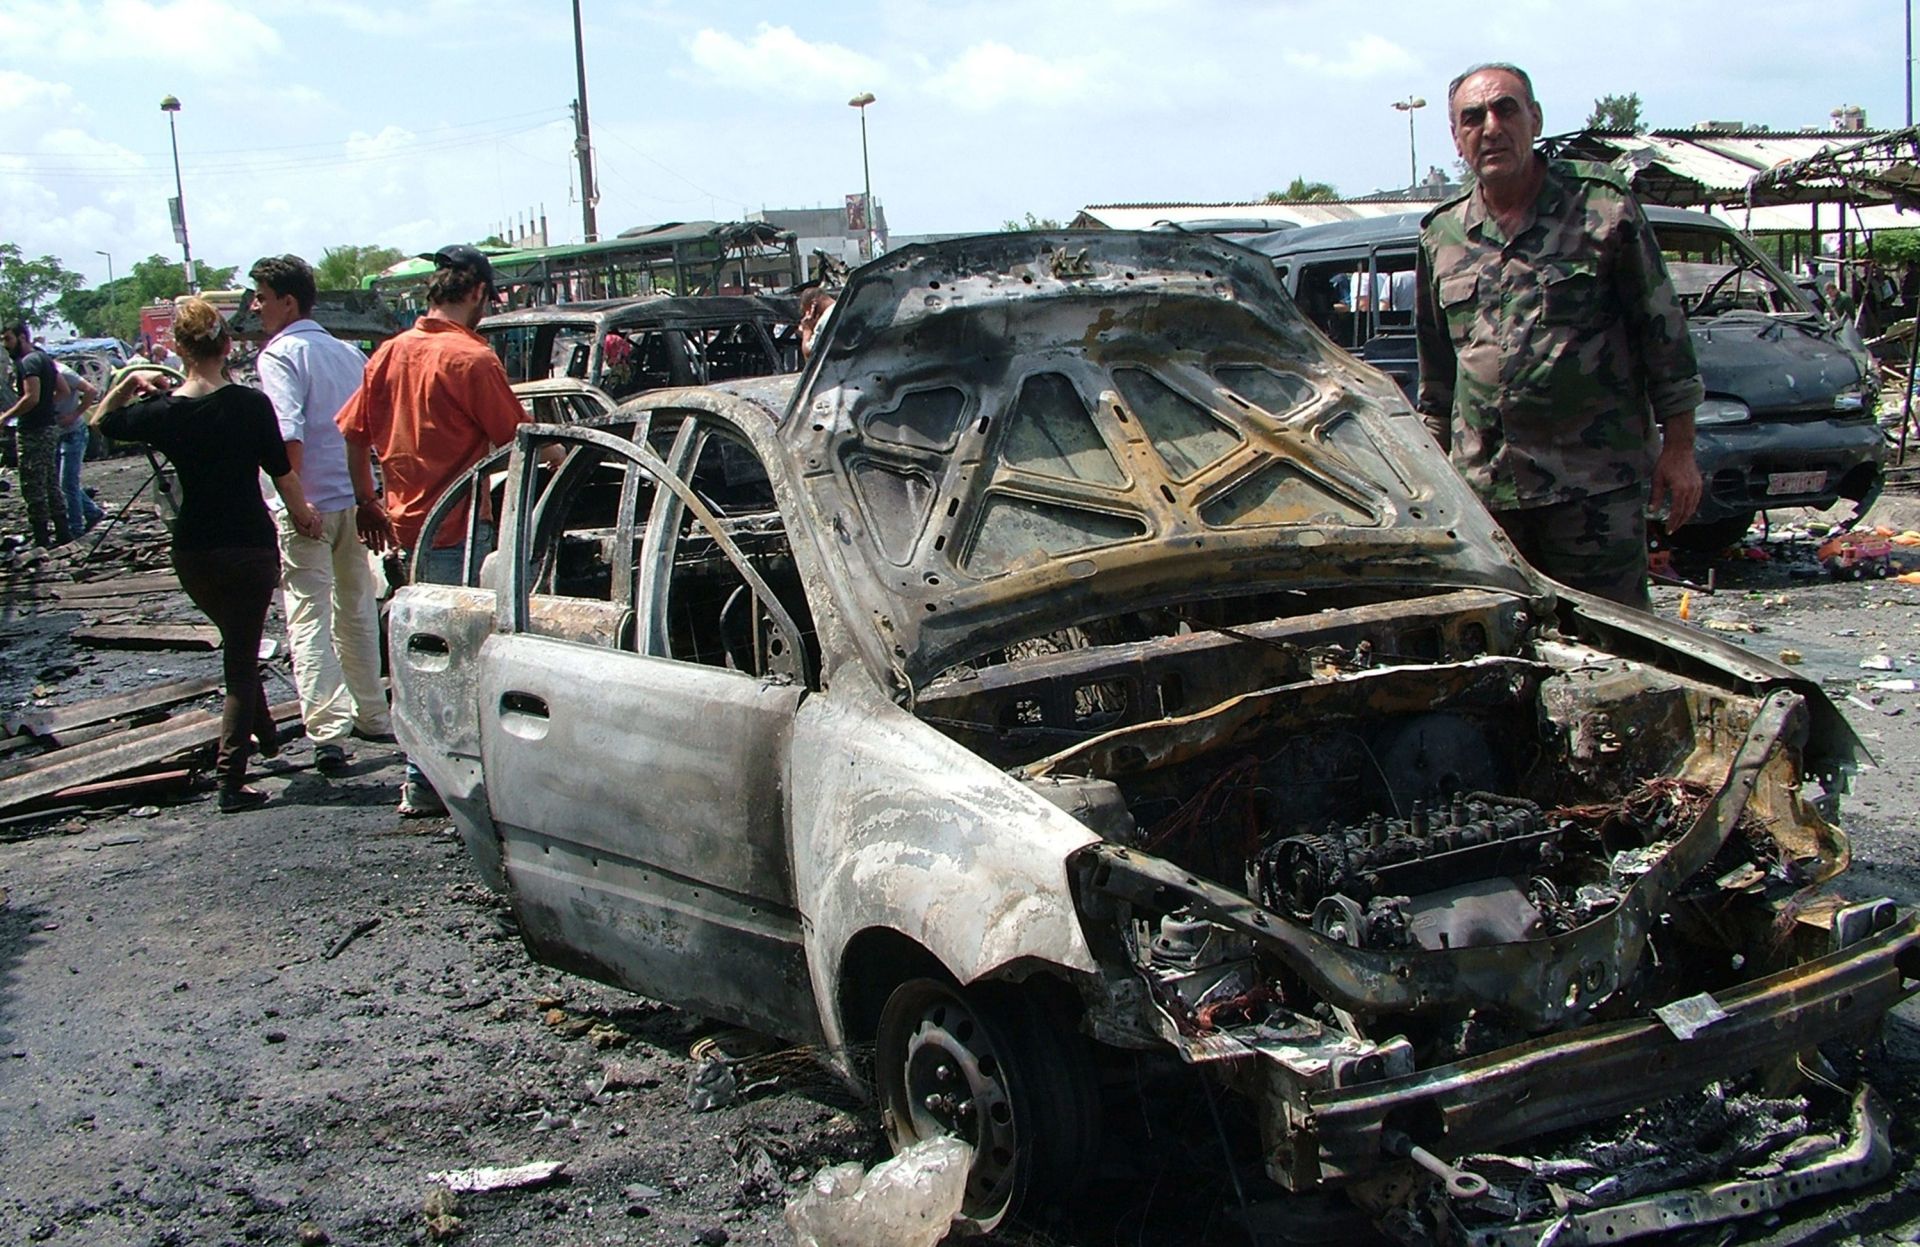 epa05324988 A handout photograph released by the official Syrian Arab News Agency (SANA) shows an officer standing next to damaged cars at the site of car bombing in a bus station in the Jableh city, Lattakia province, Syria, 23 May 2016. According to SANA, at least 78 people were killed and scores injured in a series of bombings in the coastal cities of Tartous and Jableh.  EPA/SANA HANDOUT  HANDOUT EDITORIAL USE ONLY/NO SALES